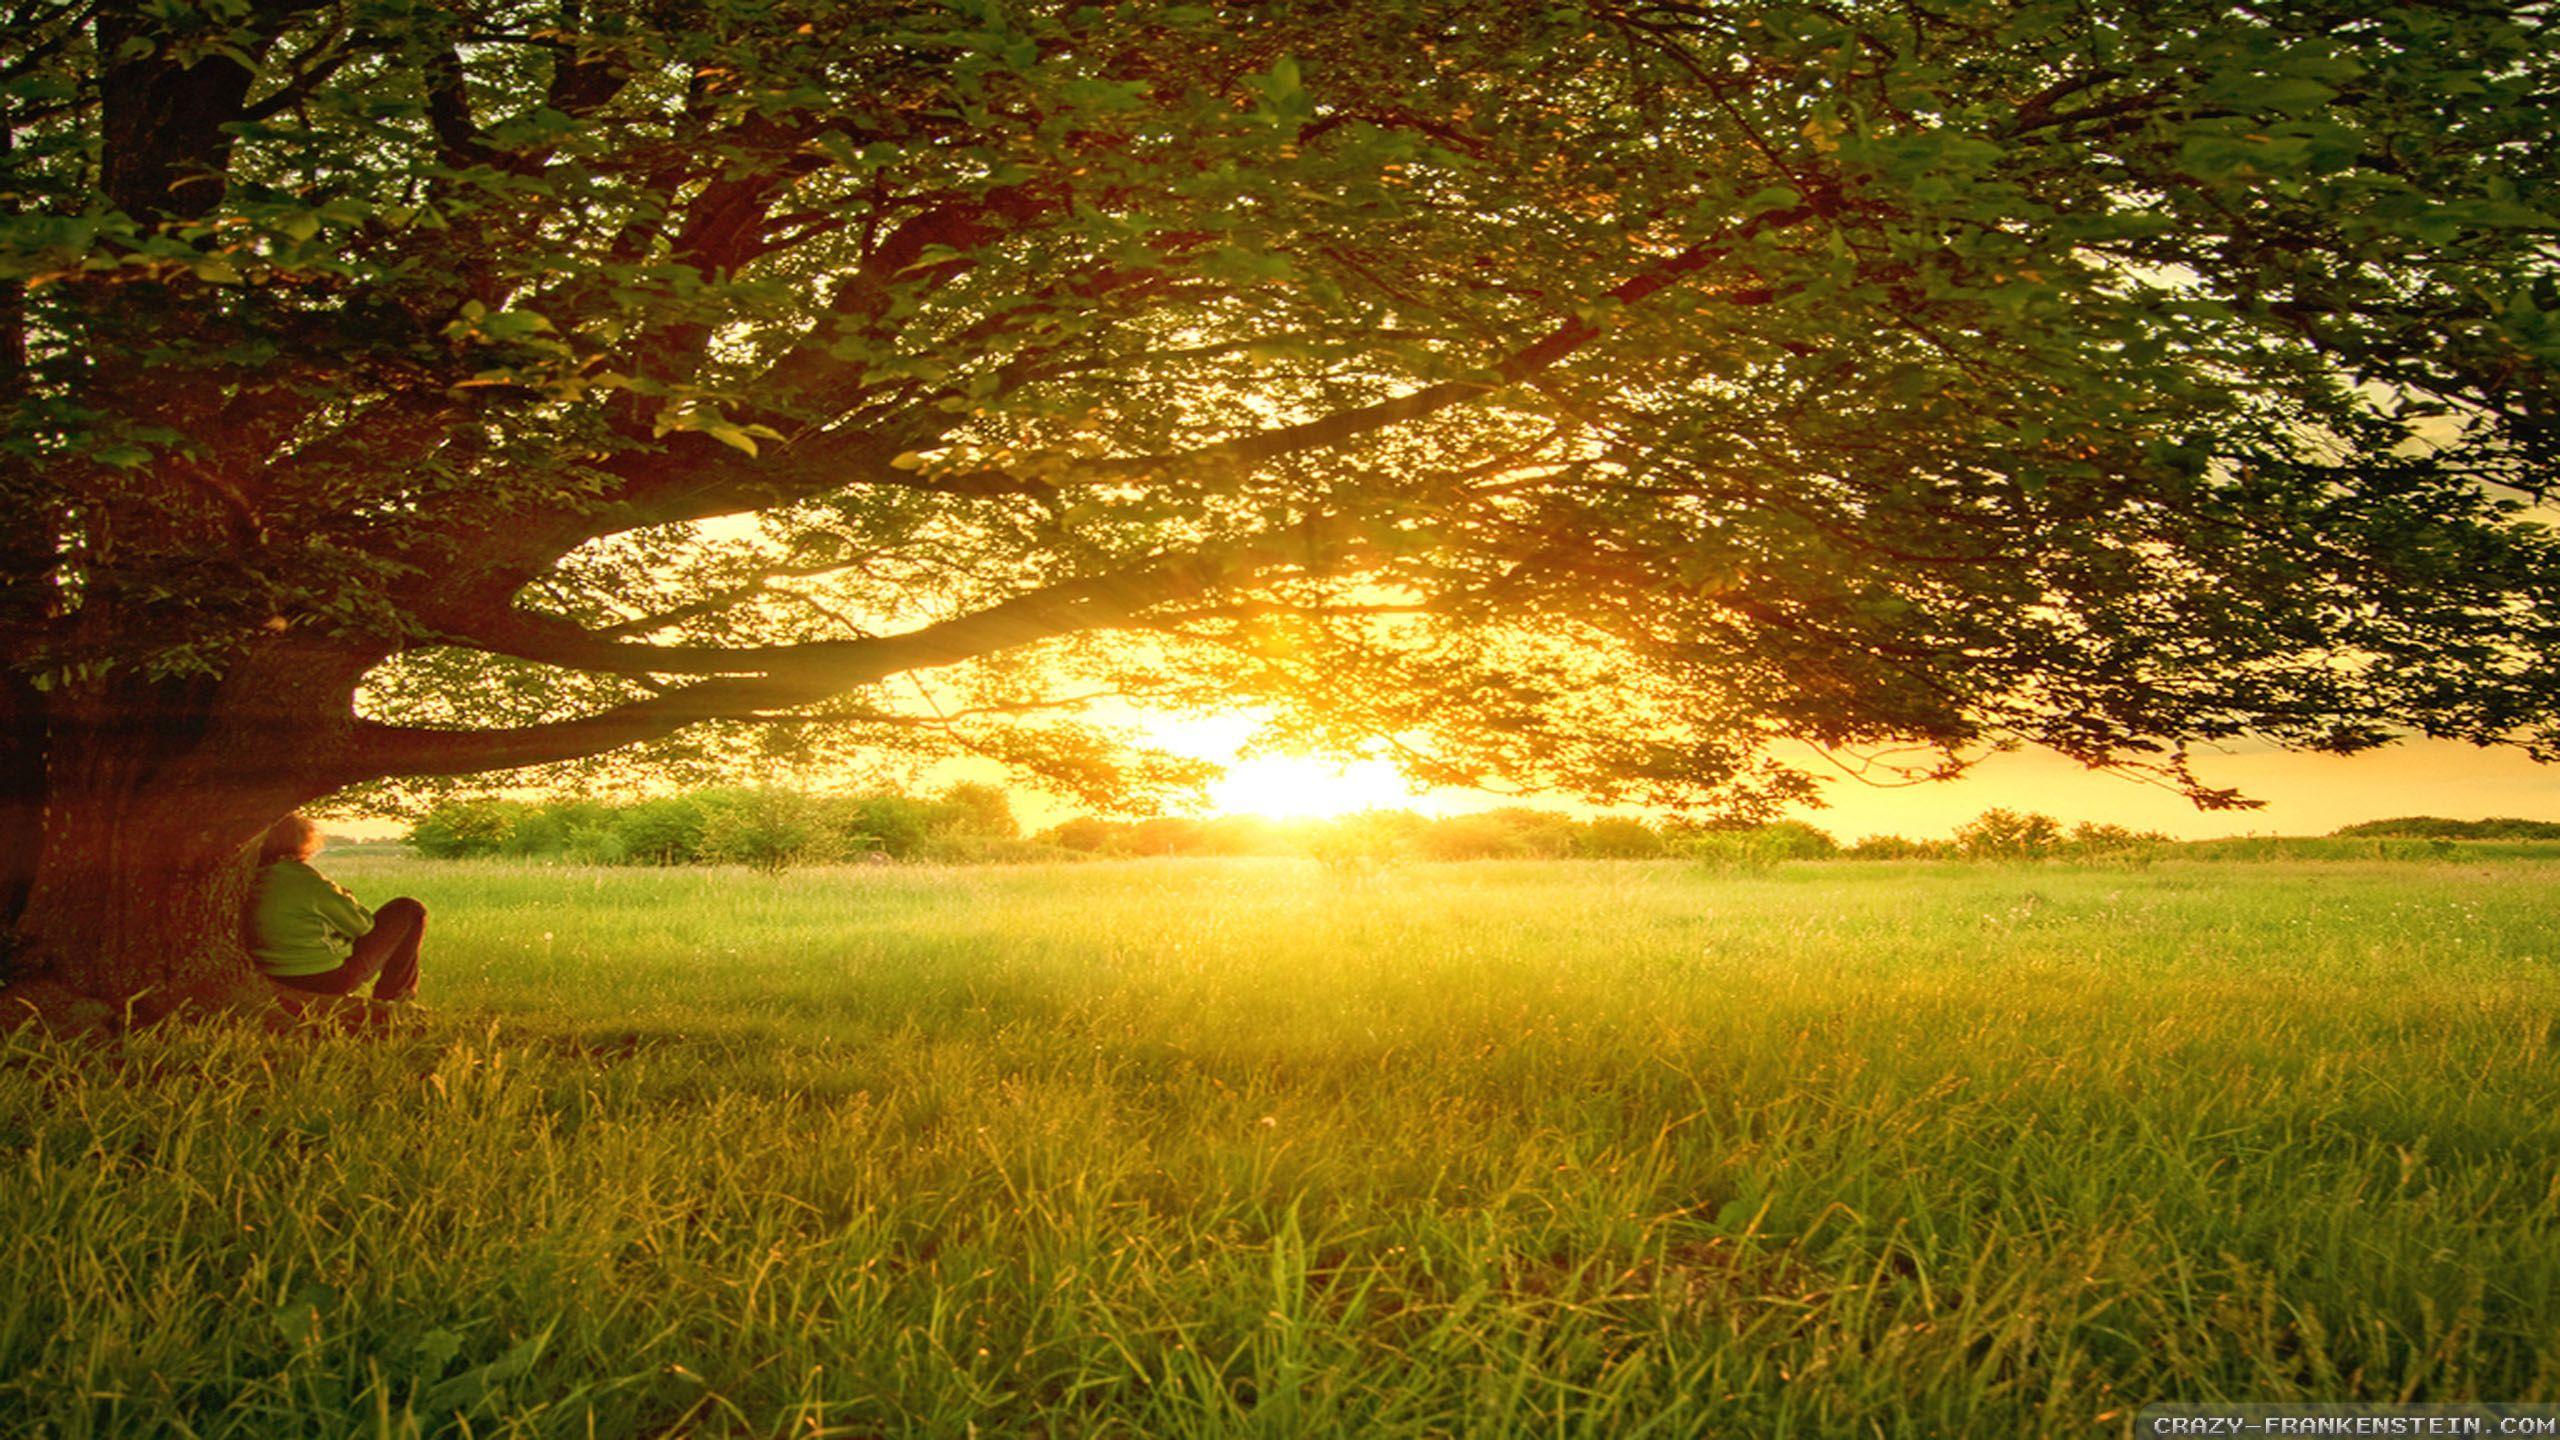 Peaceful Nature Wallpapers - Top Free Peaceful Nature Backgrounds ...